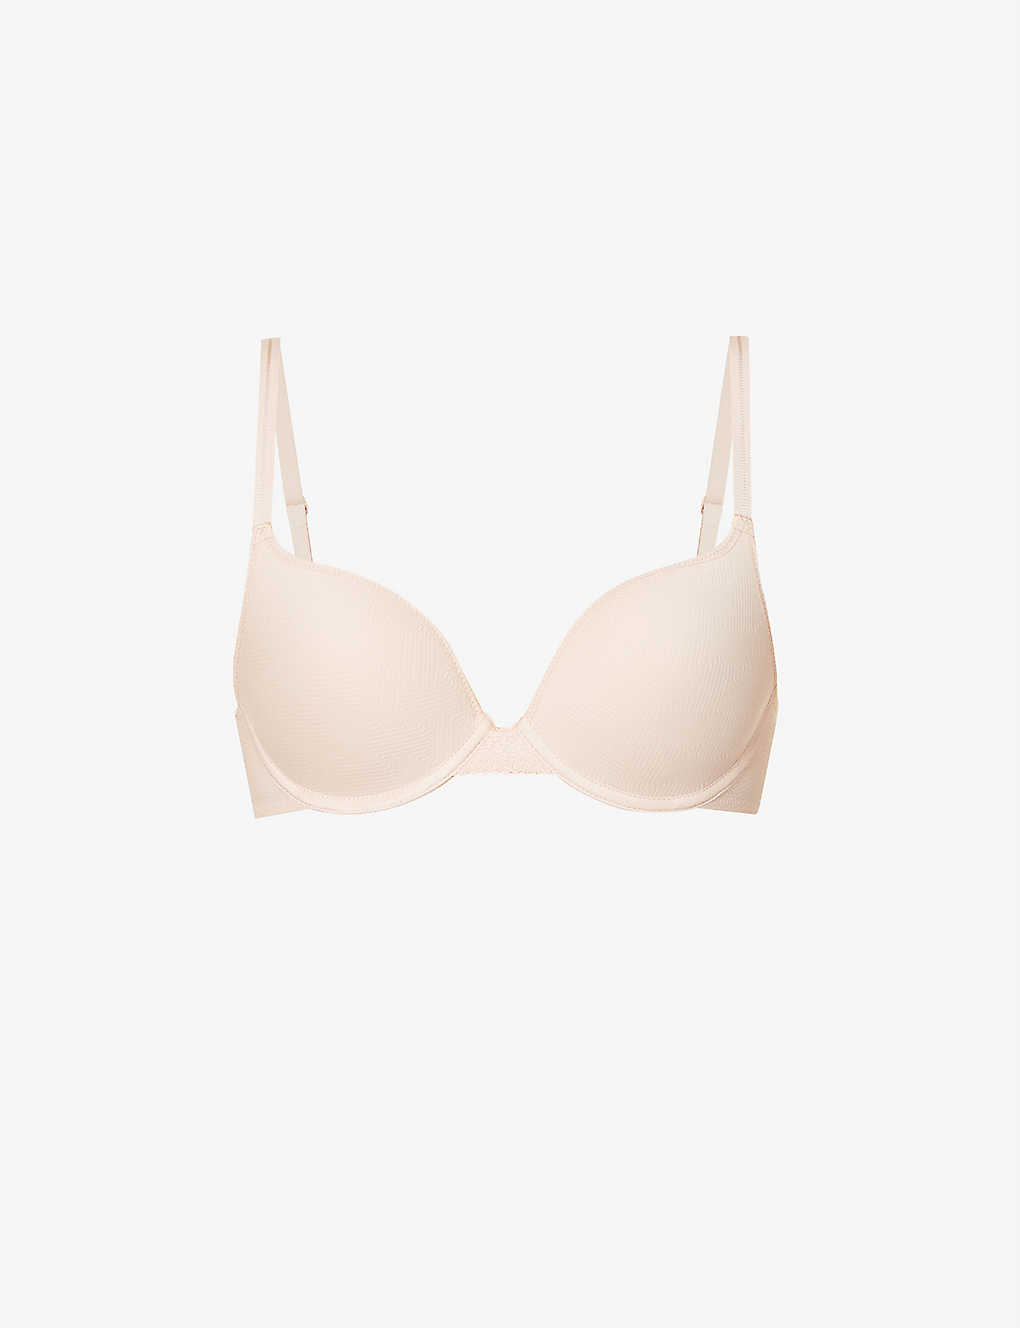 Passionata Dream Today Stretch-woven Push-up Bra In 0rg Soft Pink